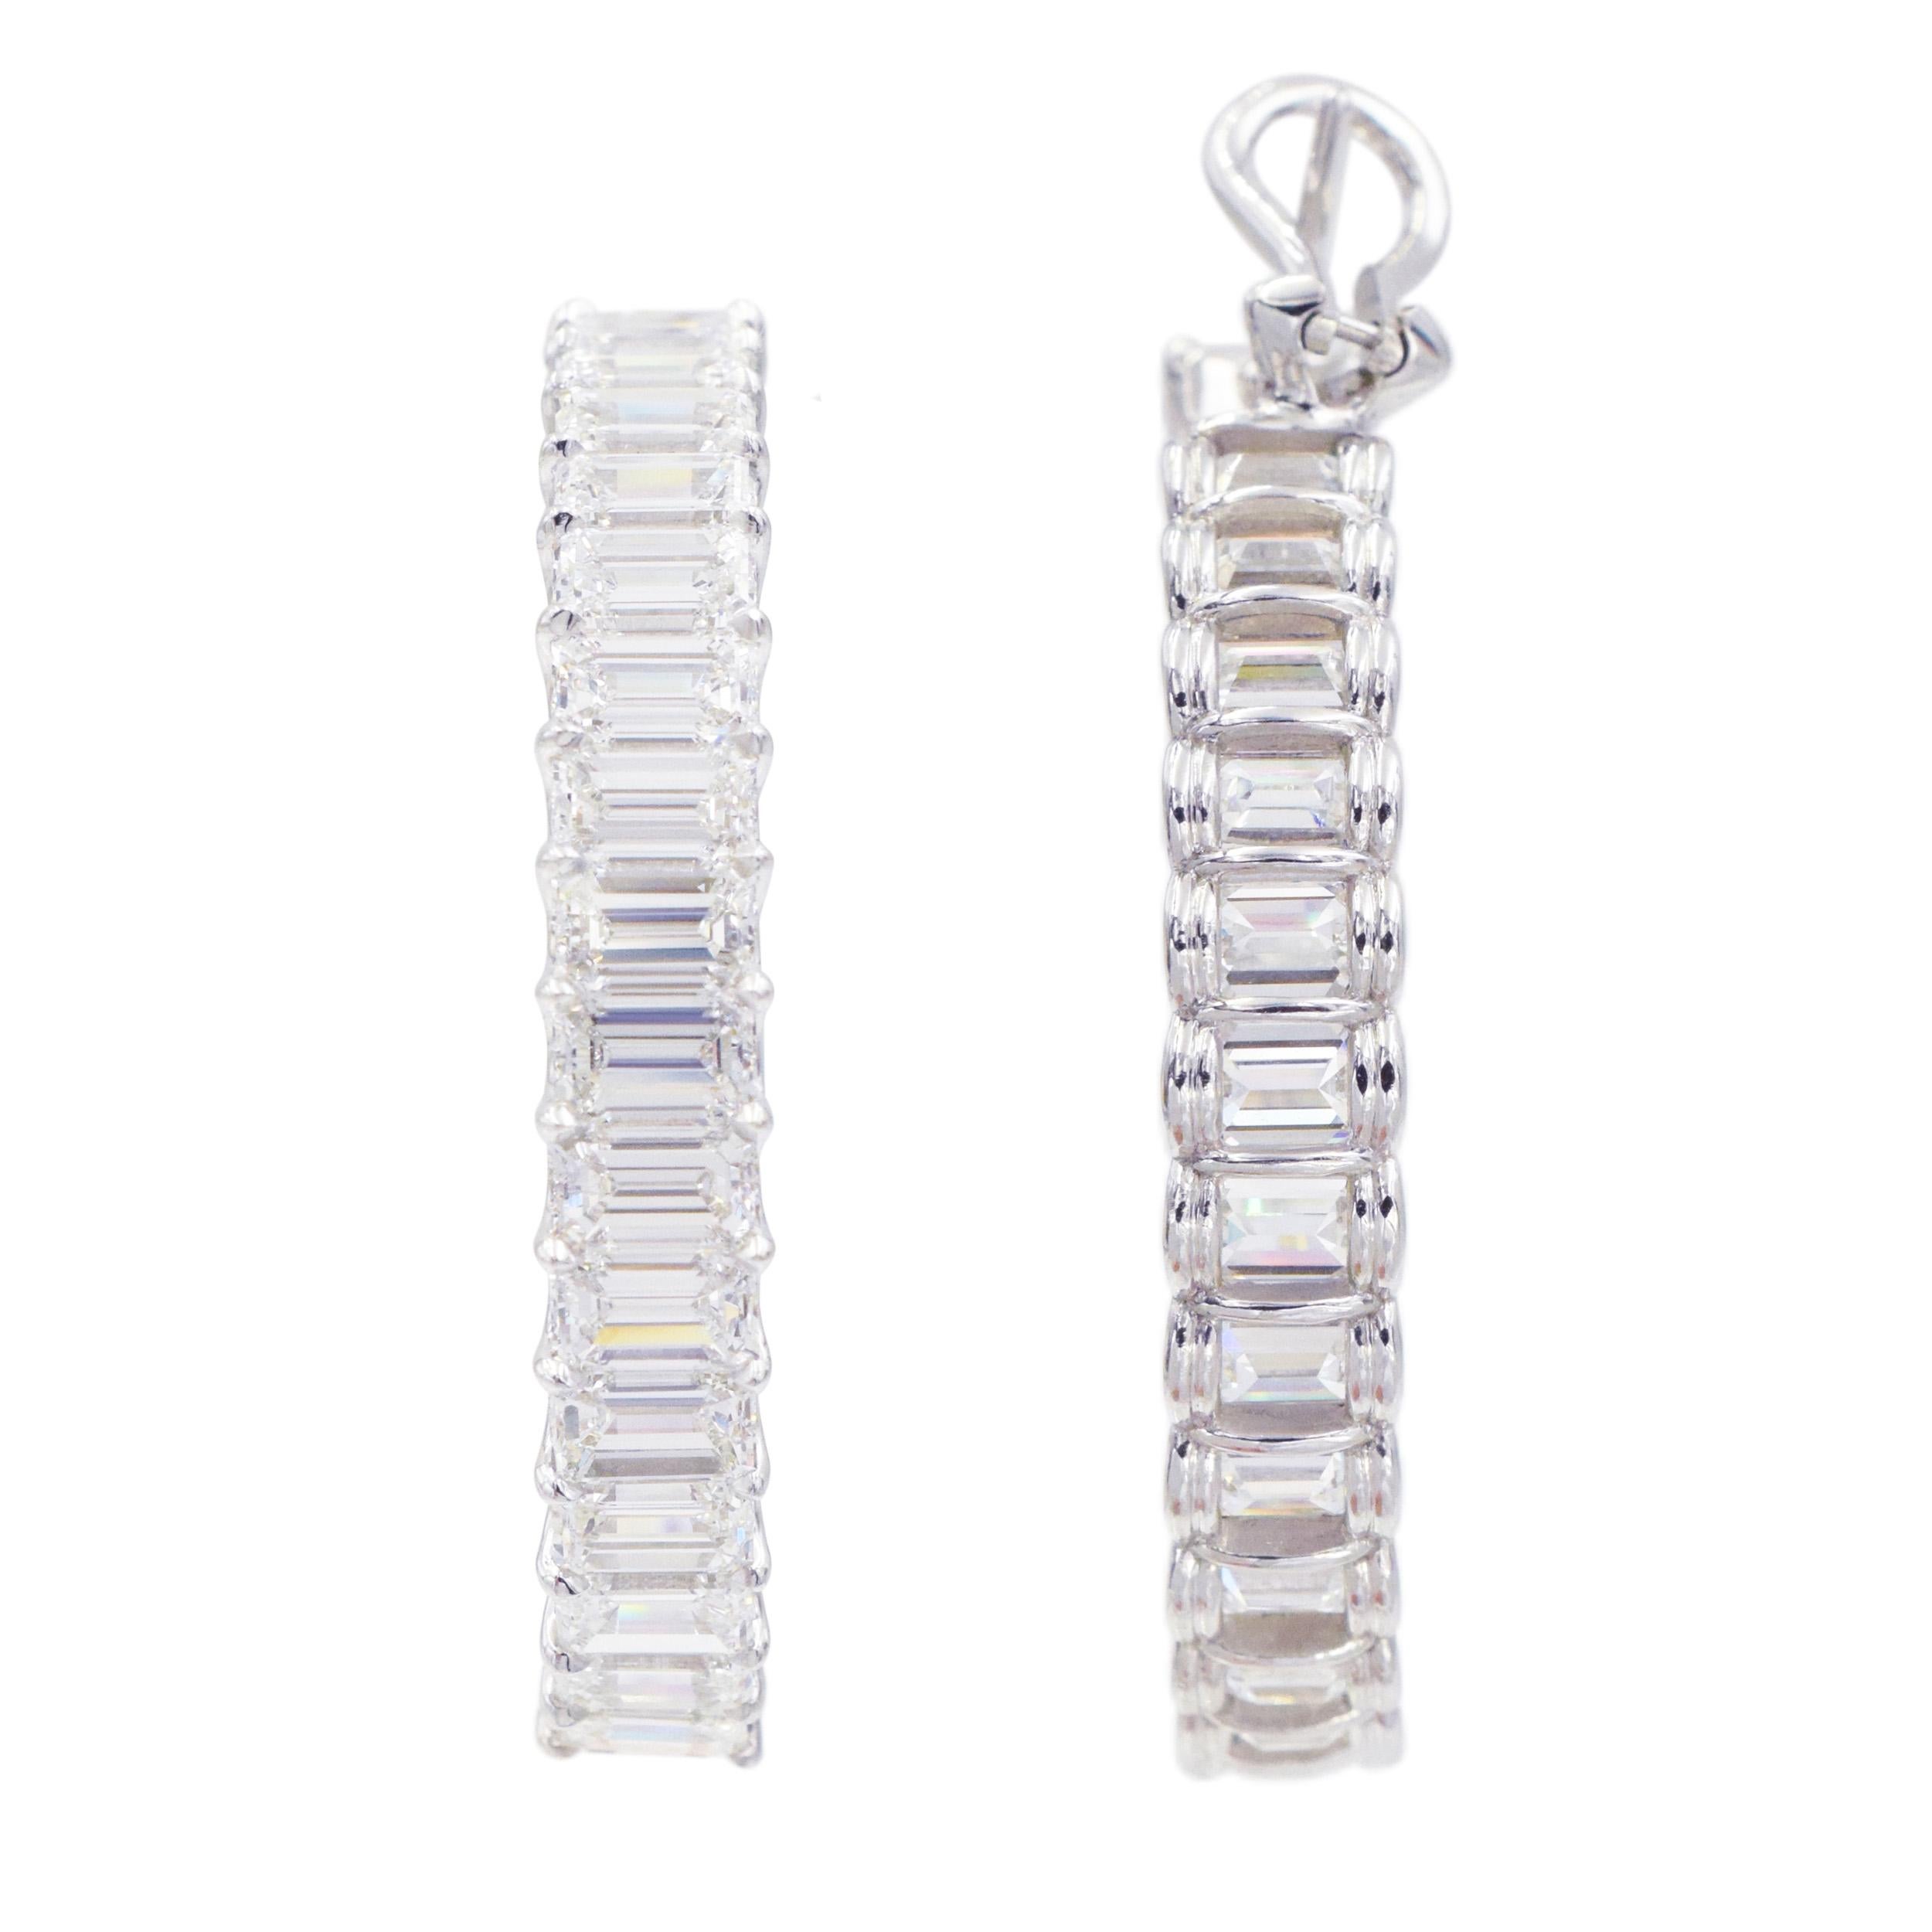 Hoop Earrings Inside-Out with Emerald Cut Diamonds For Sale 2